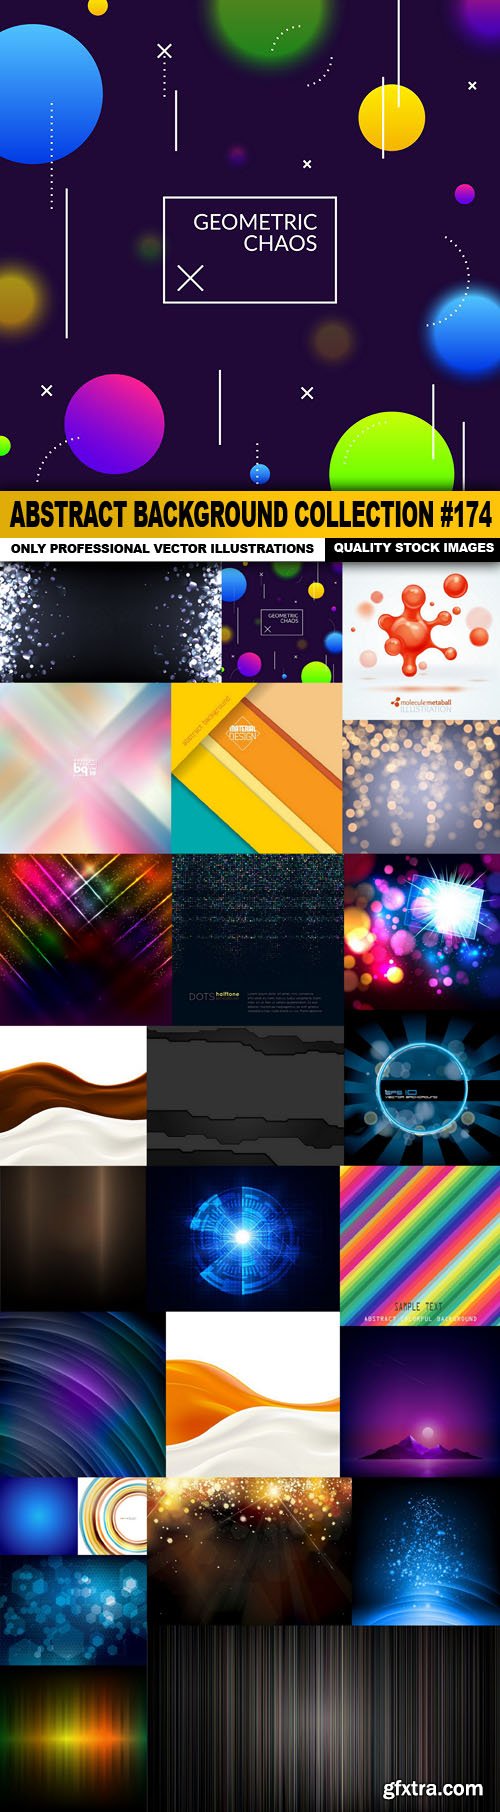 Abstract Background Collection #174 - 25 Vector